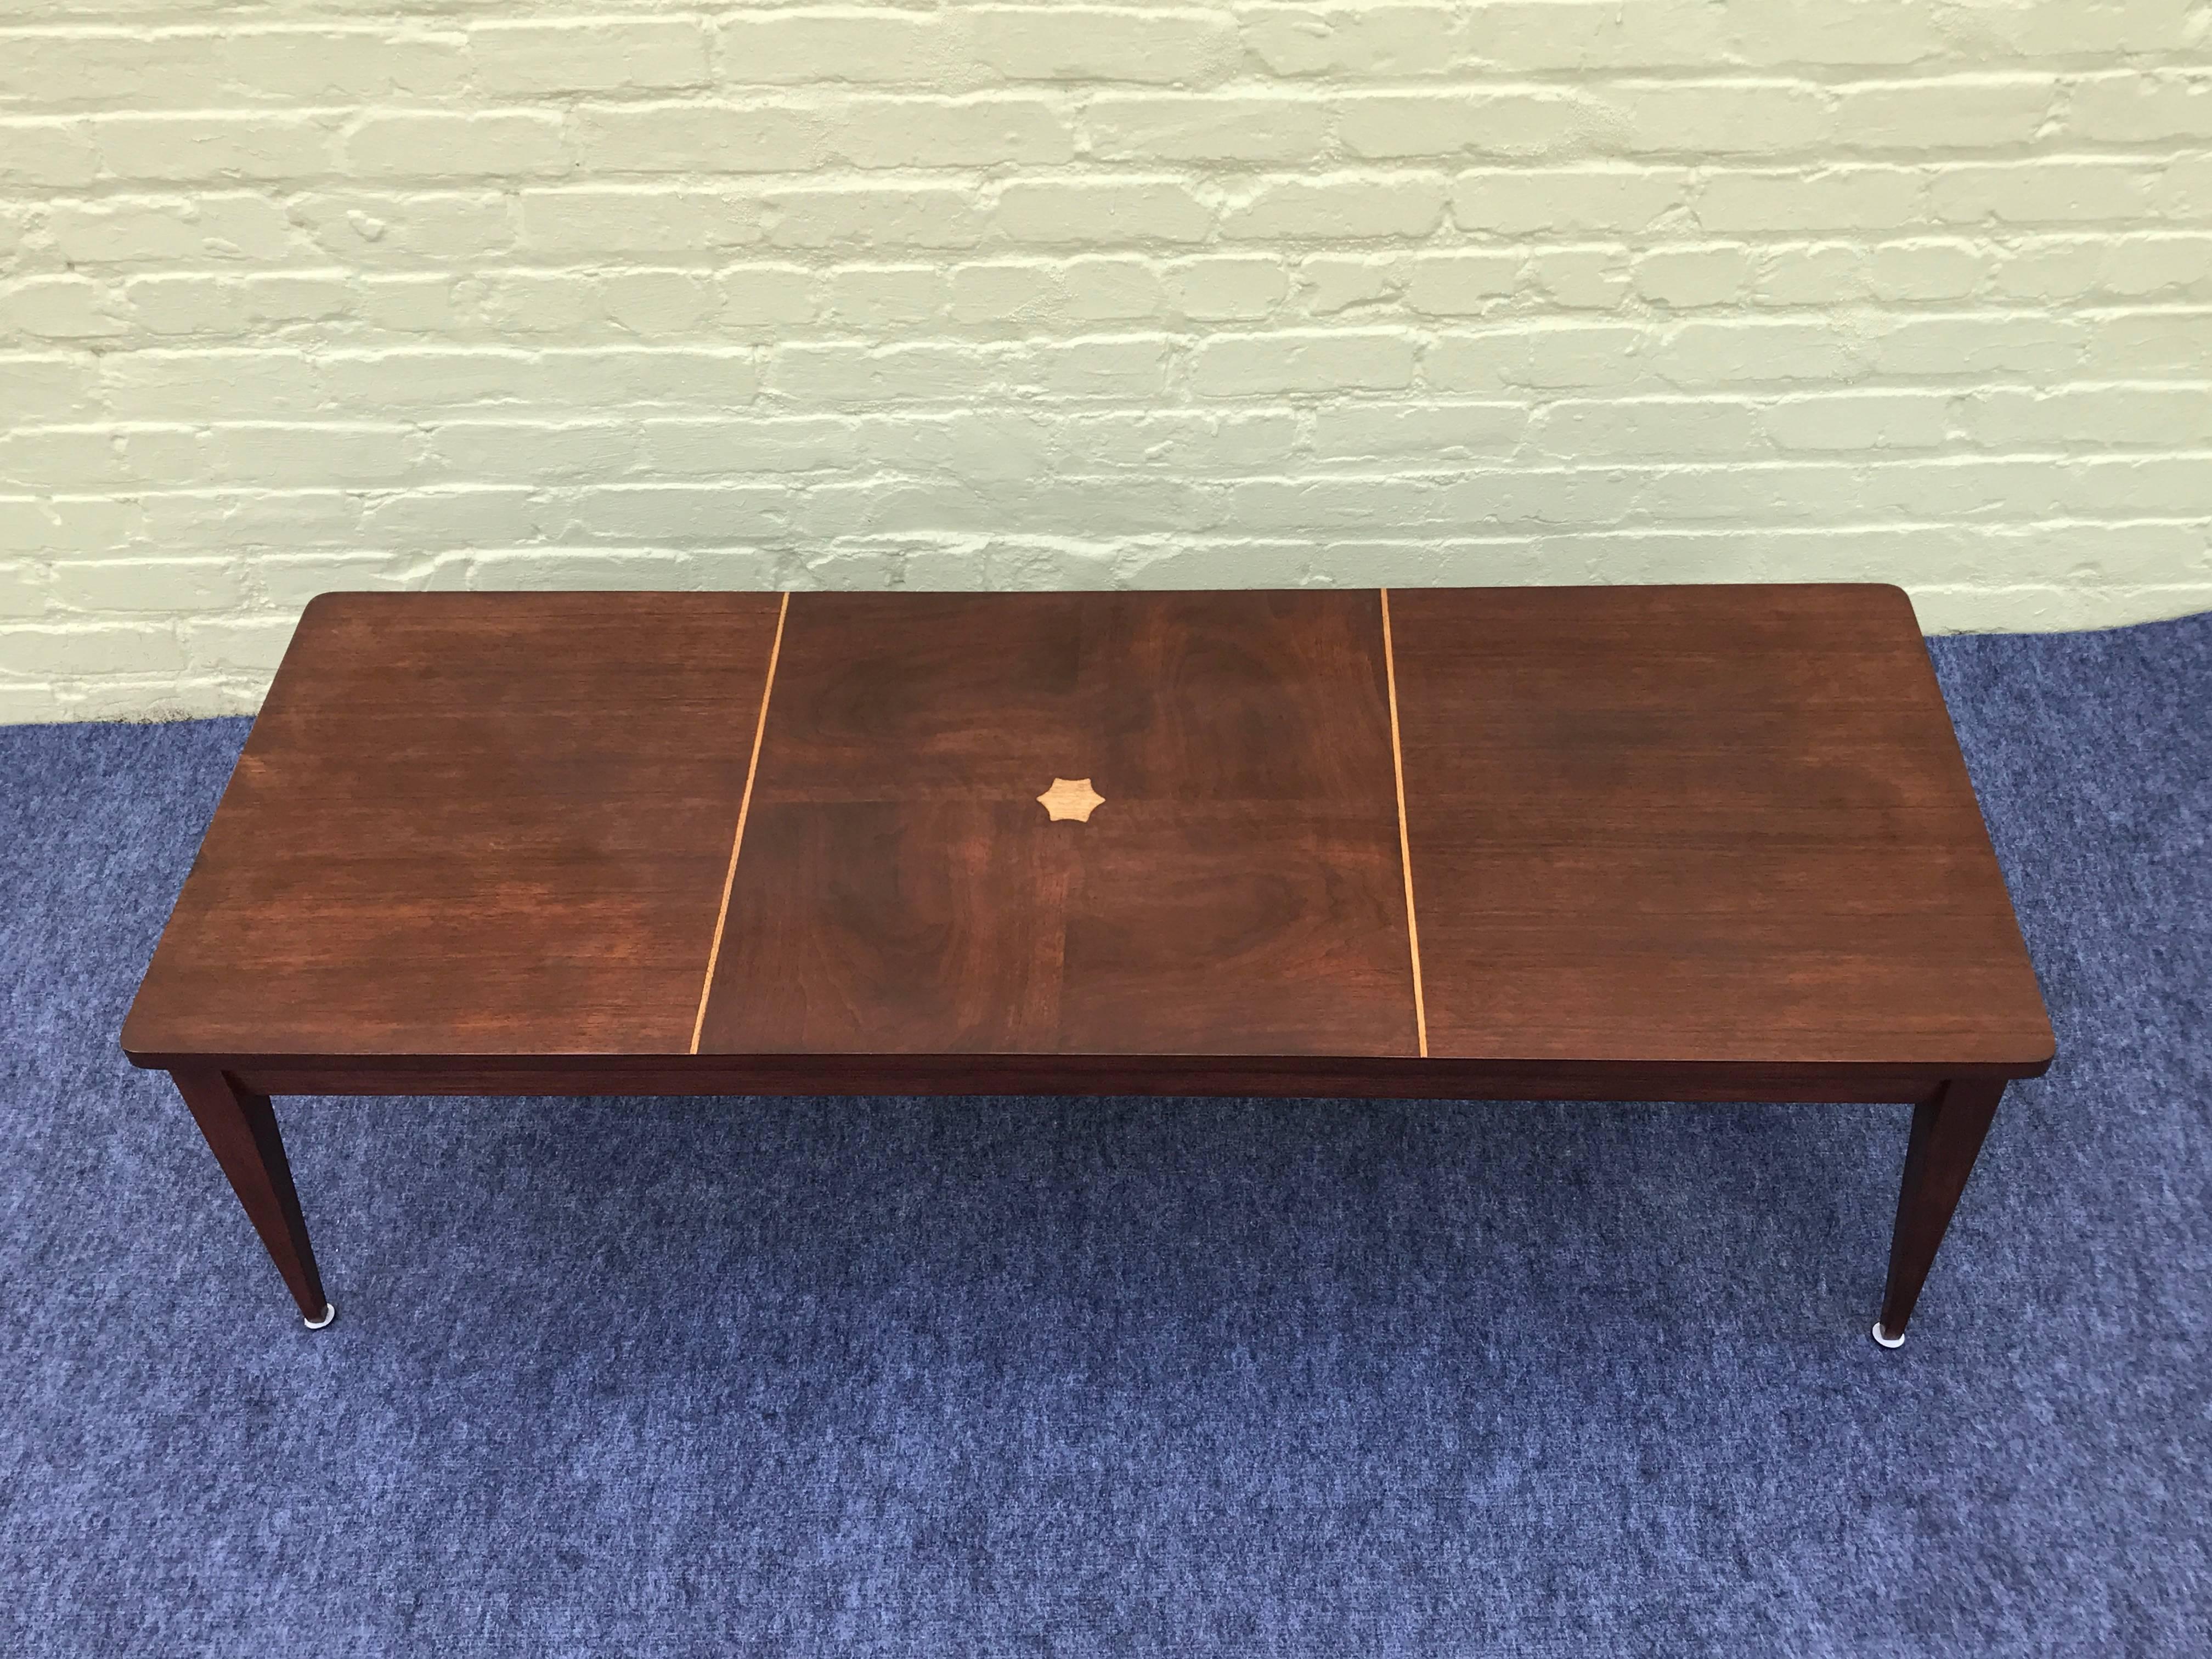 Offered is a gorgeous, 1960s dark walnut coffee table with blonde wood inlay. Marked: Mersman.